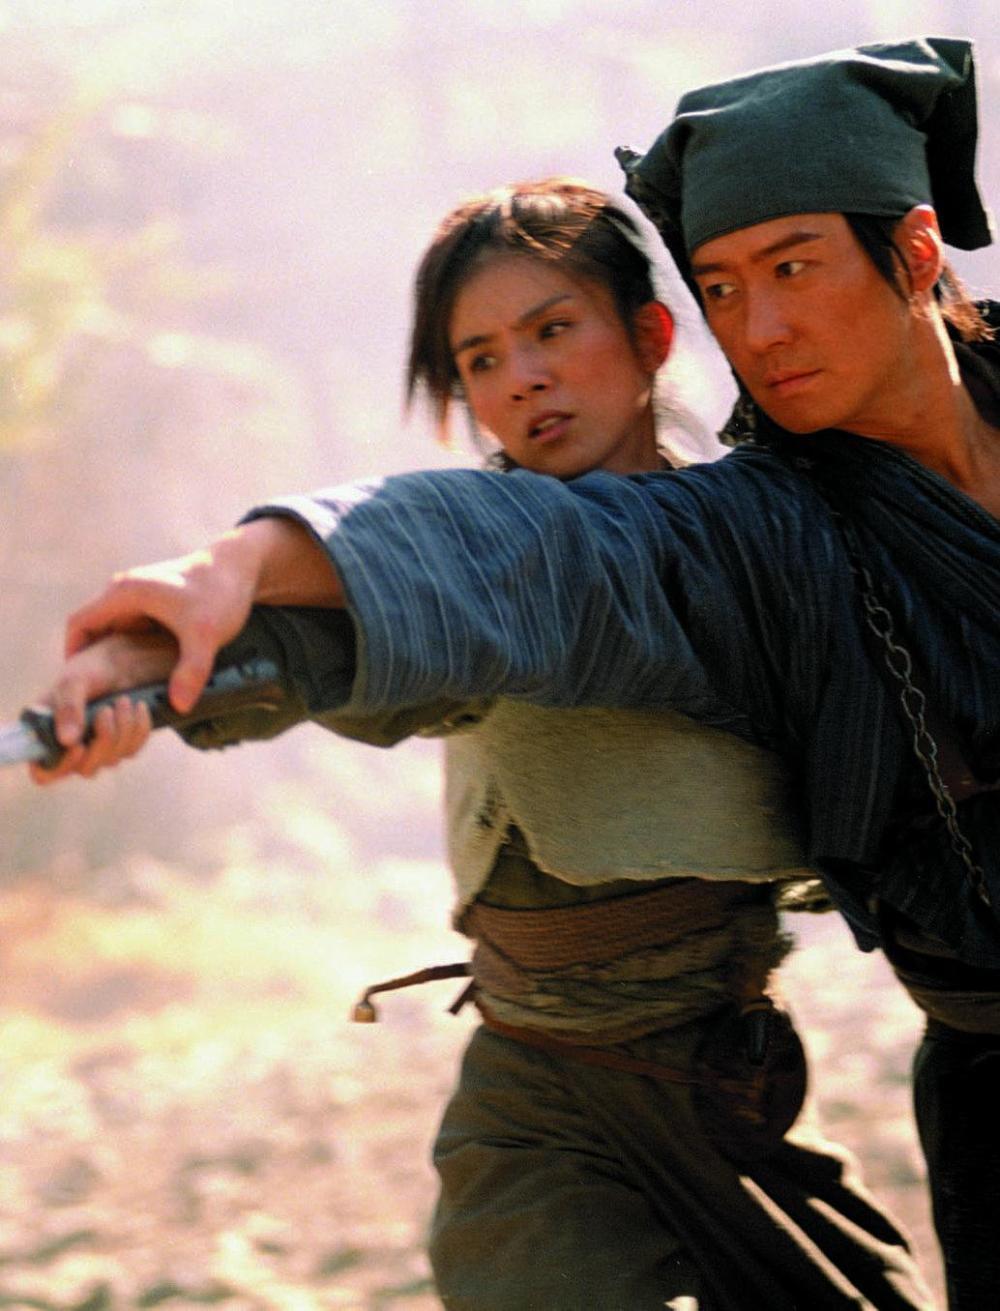 A photo still from the wuxia film Seven Swords. It shows two characters practicing with a sword.